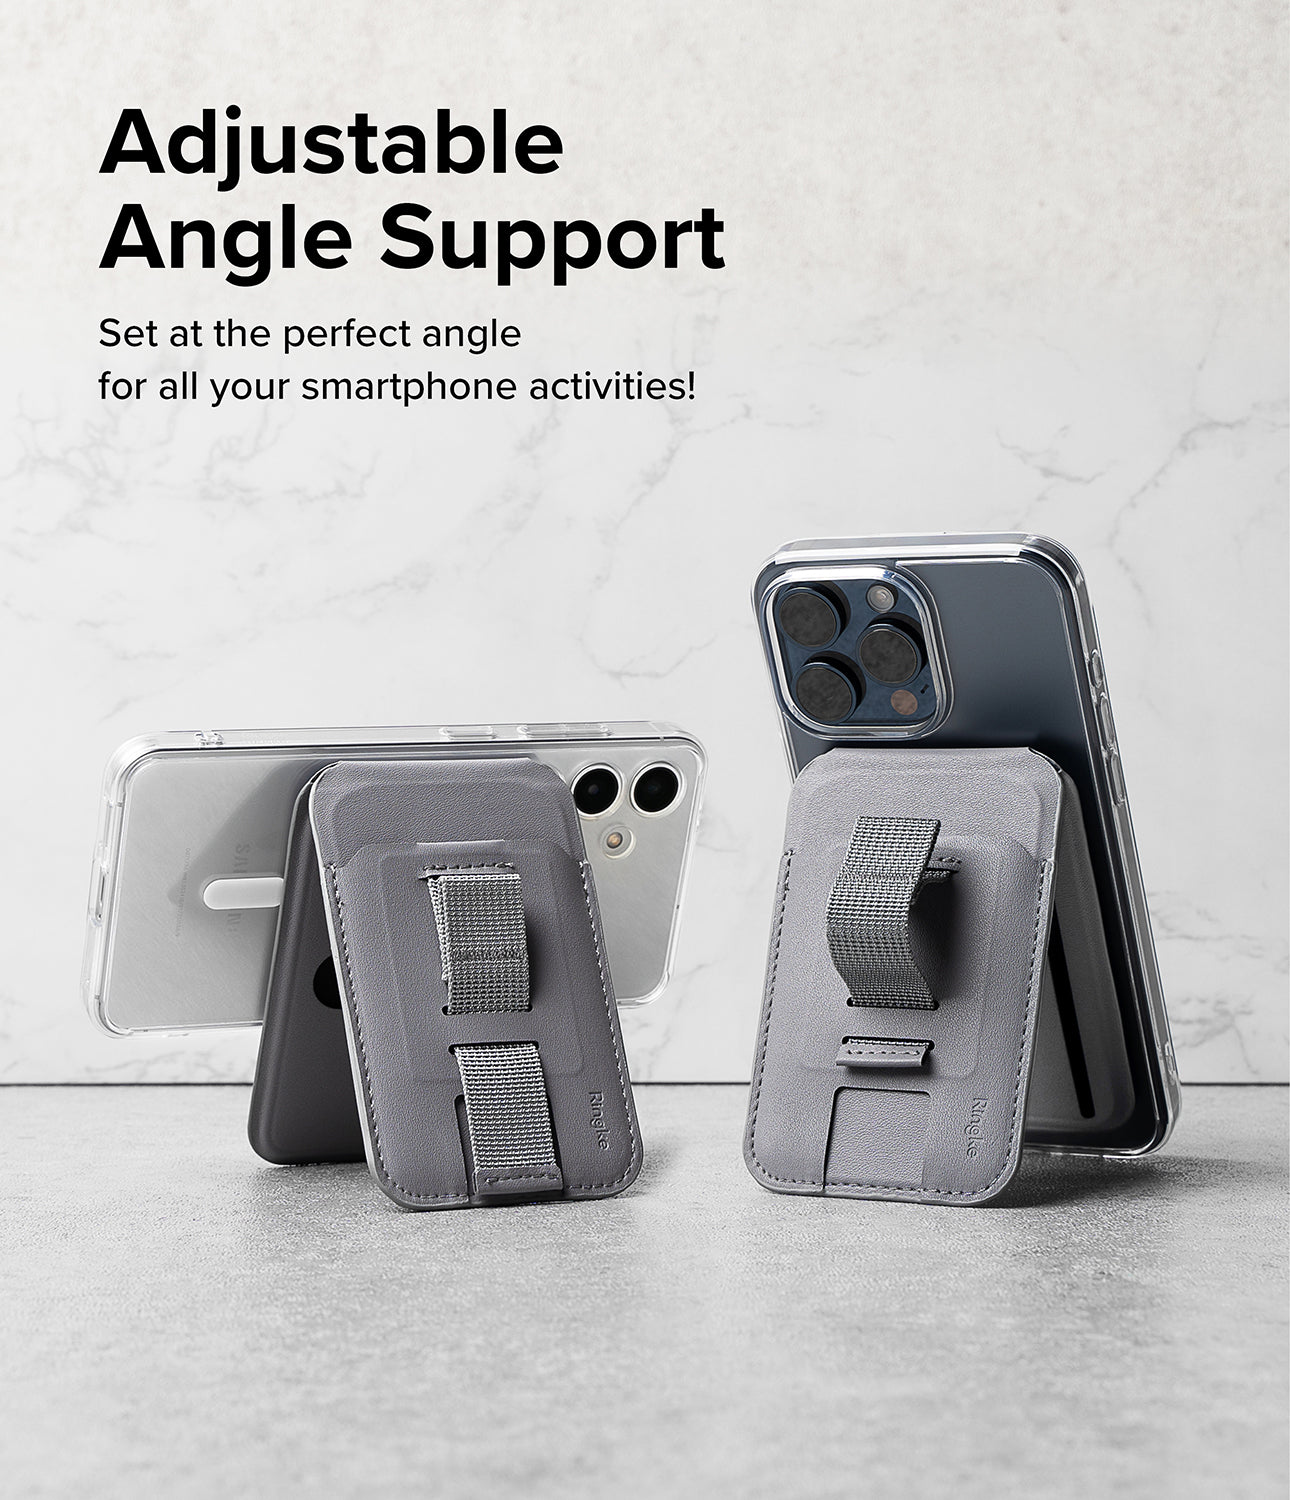 Ringke Stand Grip Magnetic Card Holder Wallet - Adjustable Angle Support. Set at the perfect angle for all your smartphone activities.